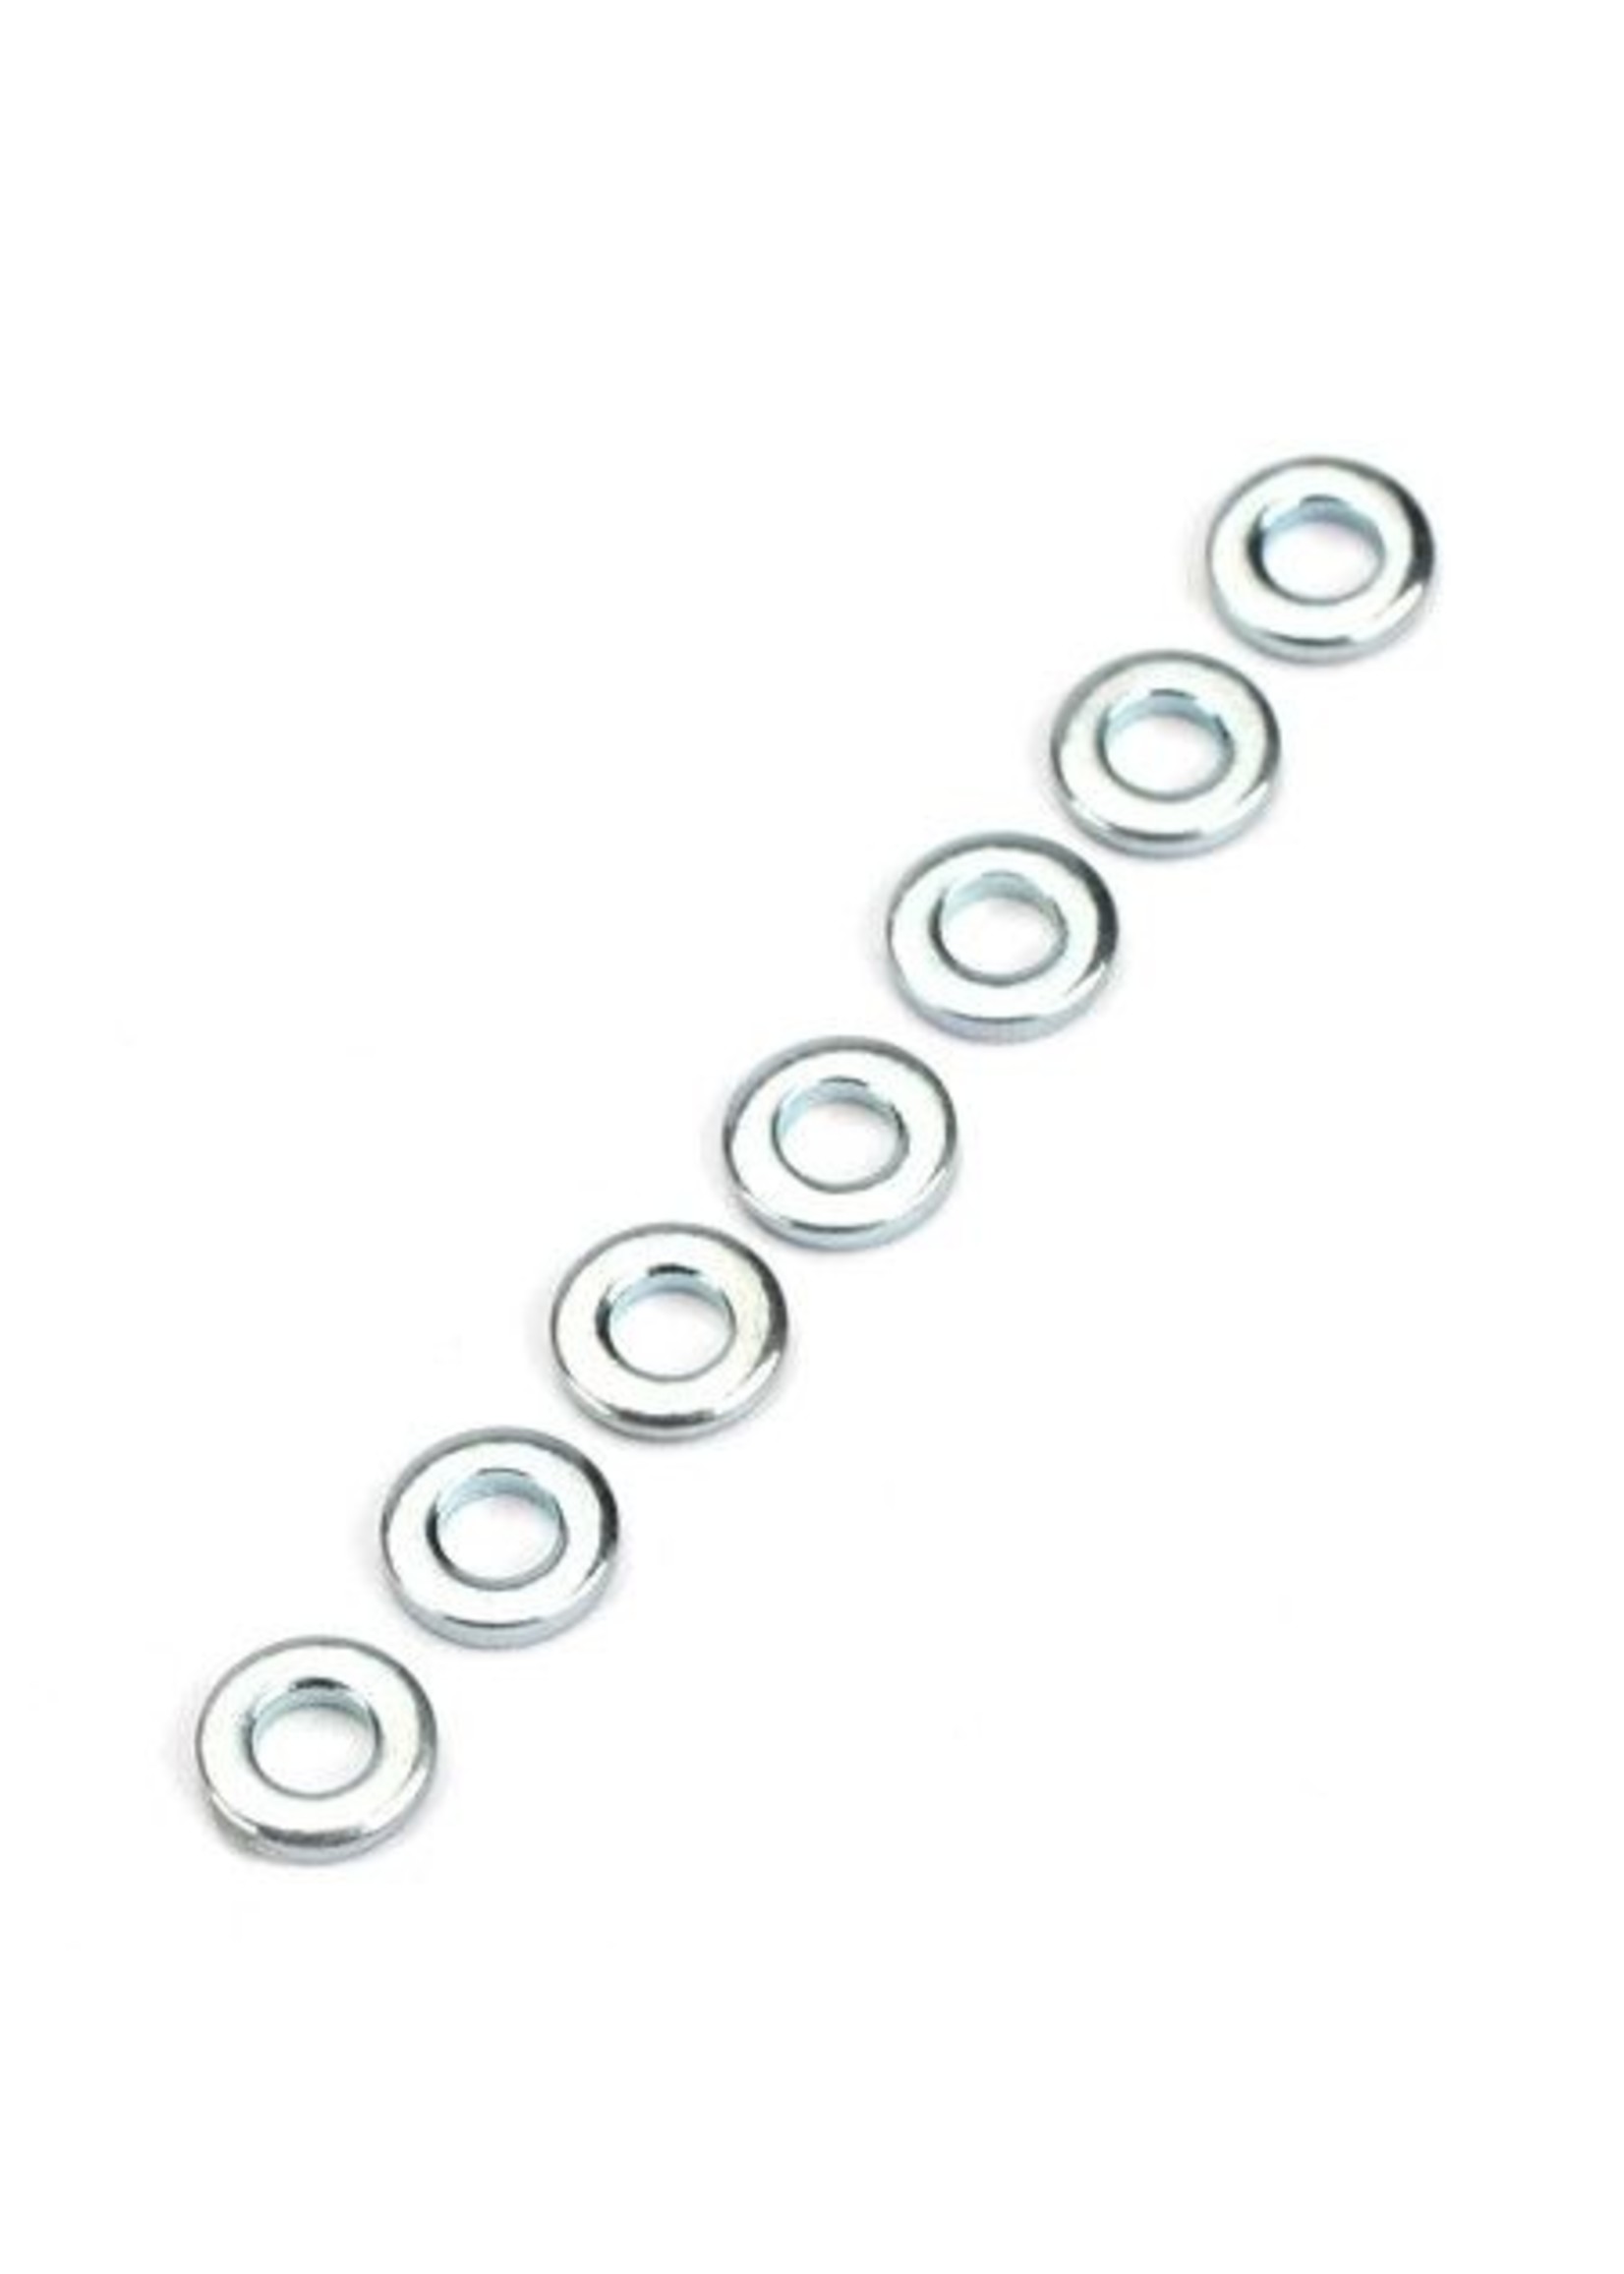 Dubro 2107 - Flat Washer 2mm (8)